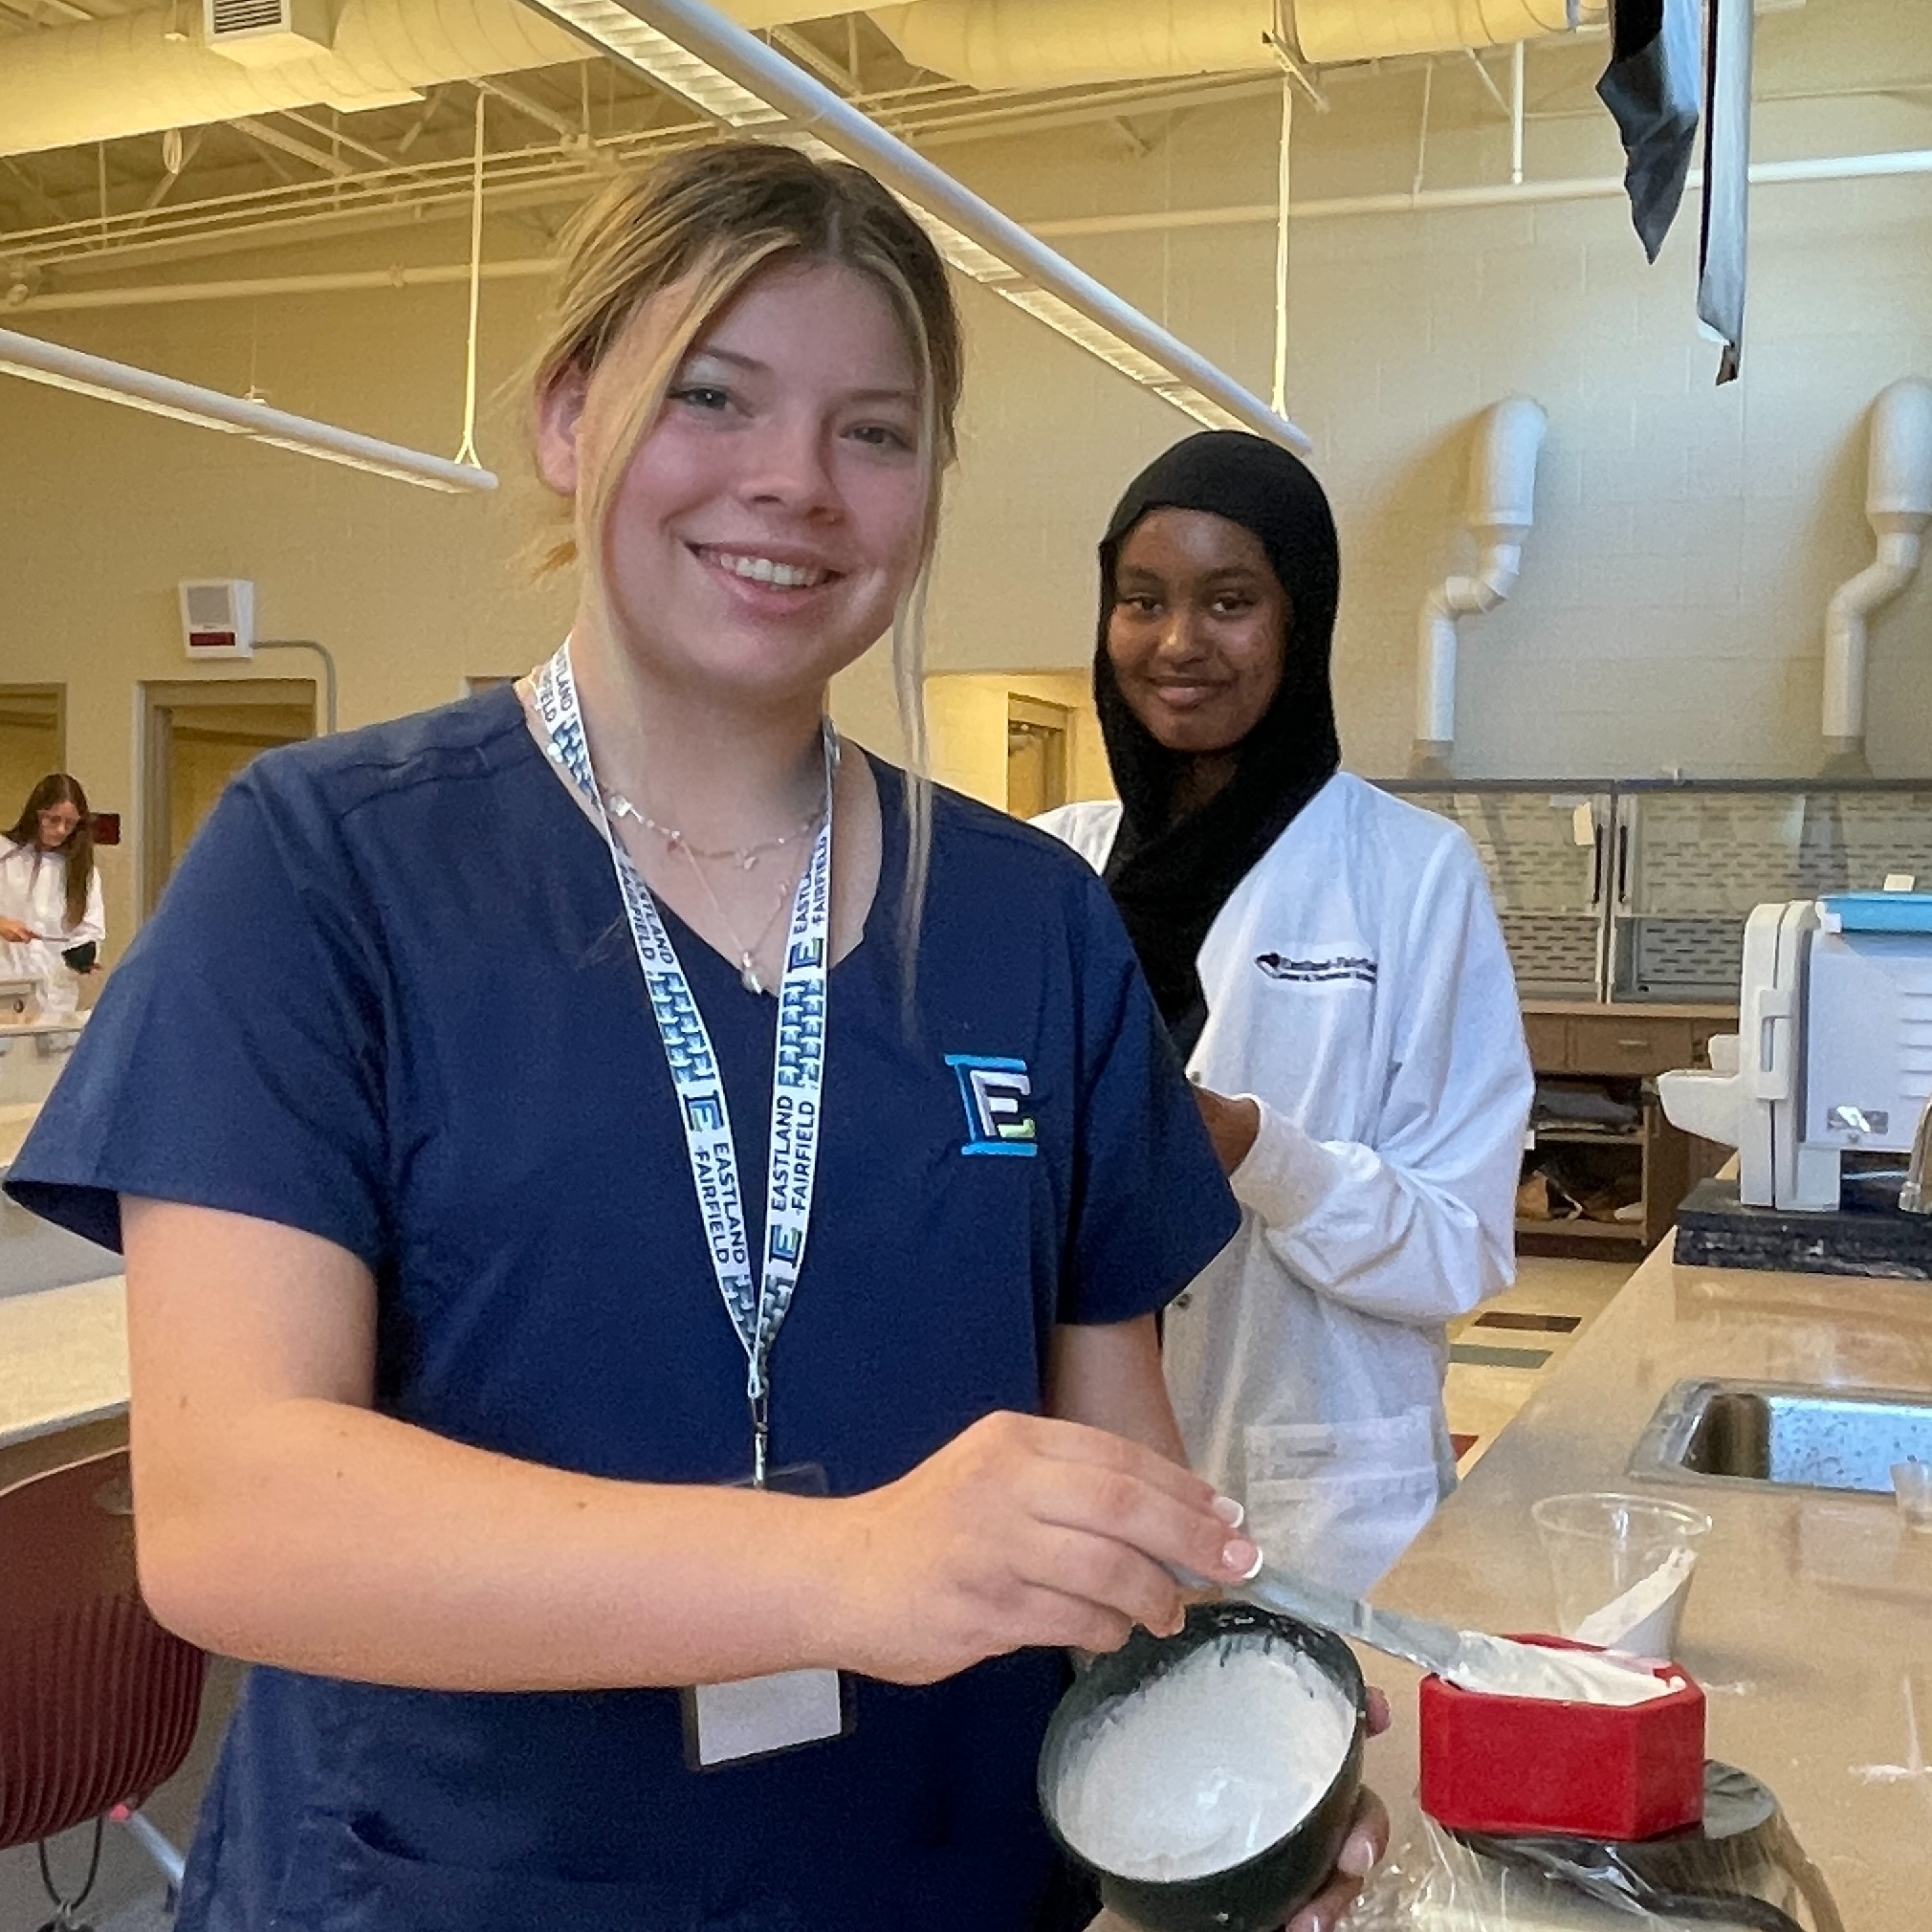 Two female students, one White and one Black wearing a hijab, smile while they finish mixing their putty impression kits.